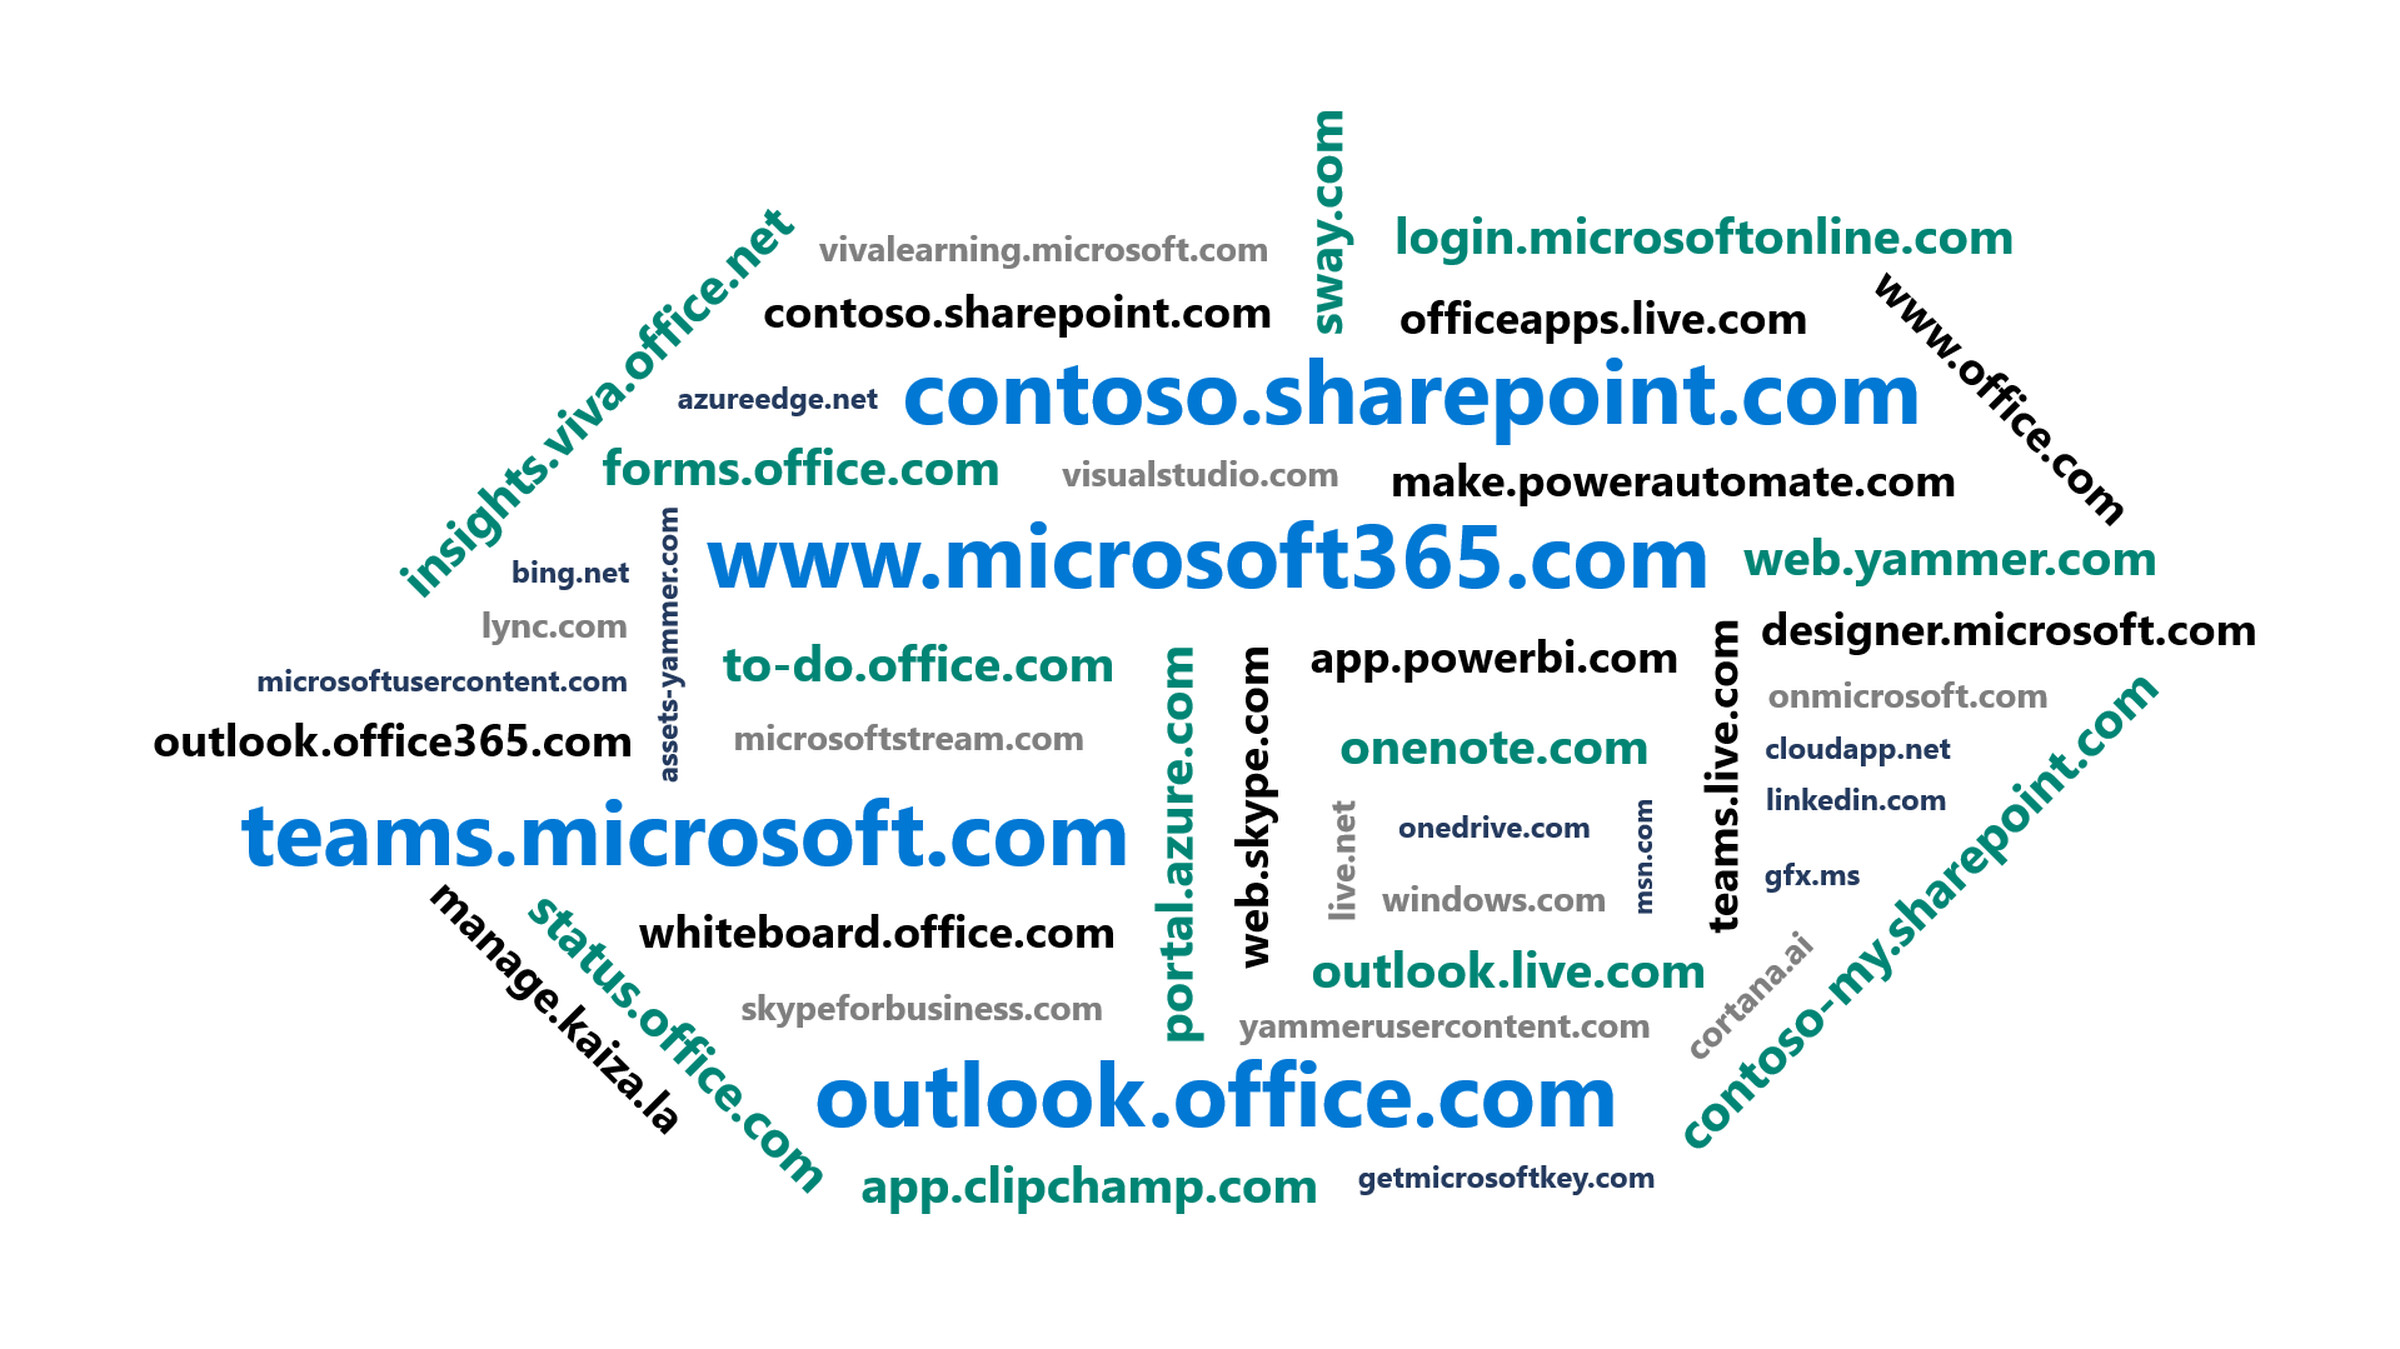 A word cloud showing domains Microsoft uses for some of its apps.